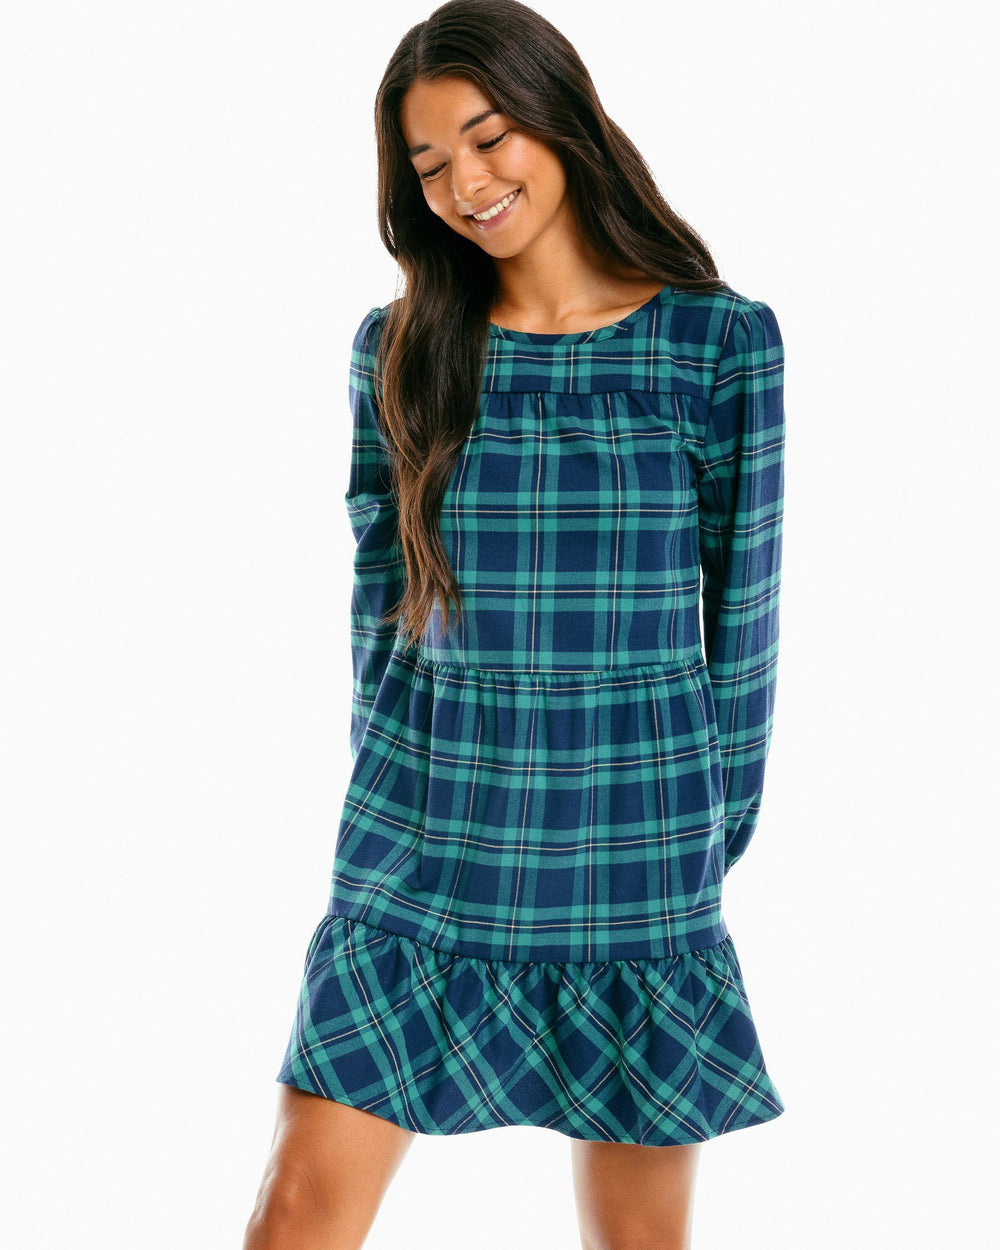 The front of the Women's Nadia Flannel Intercoastal Dress by Southern Tide - Evening Emerald